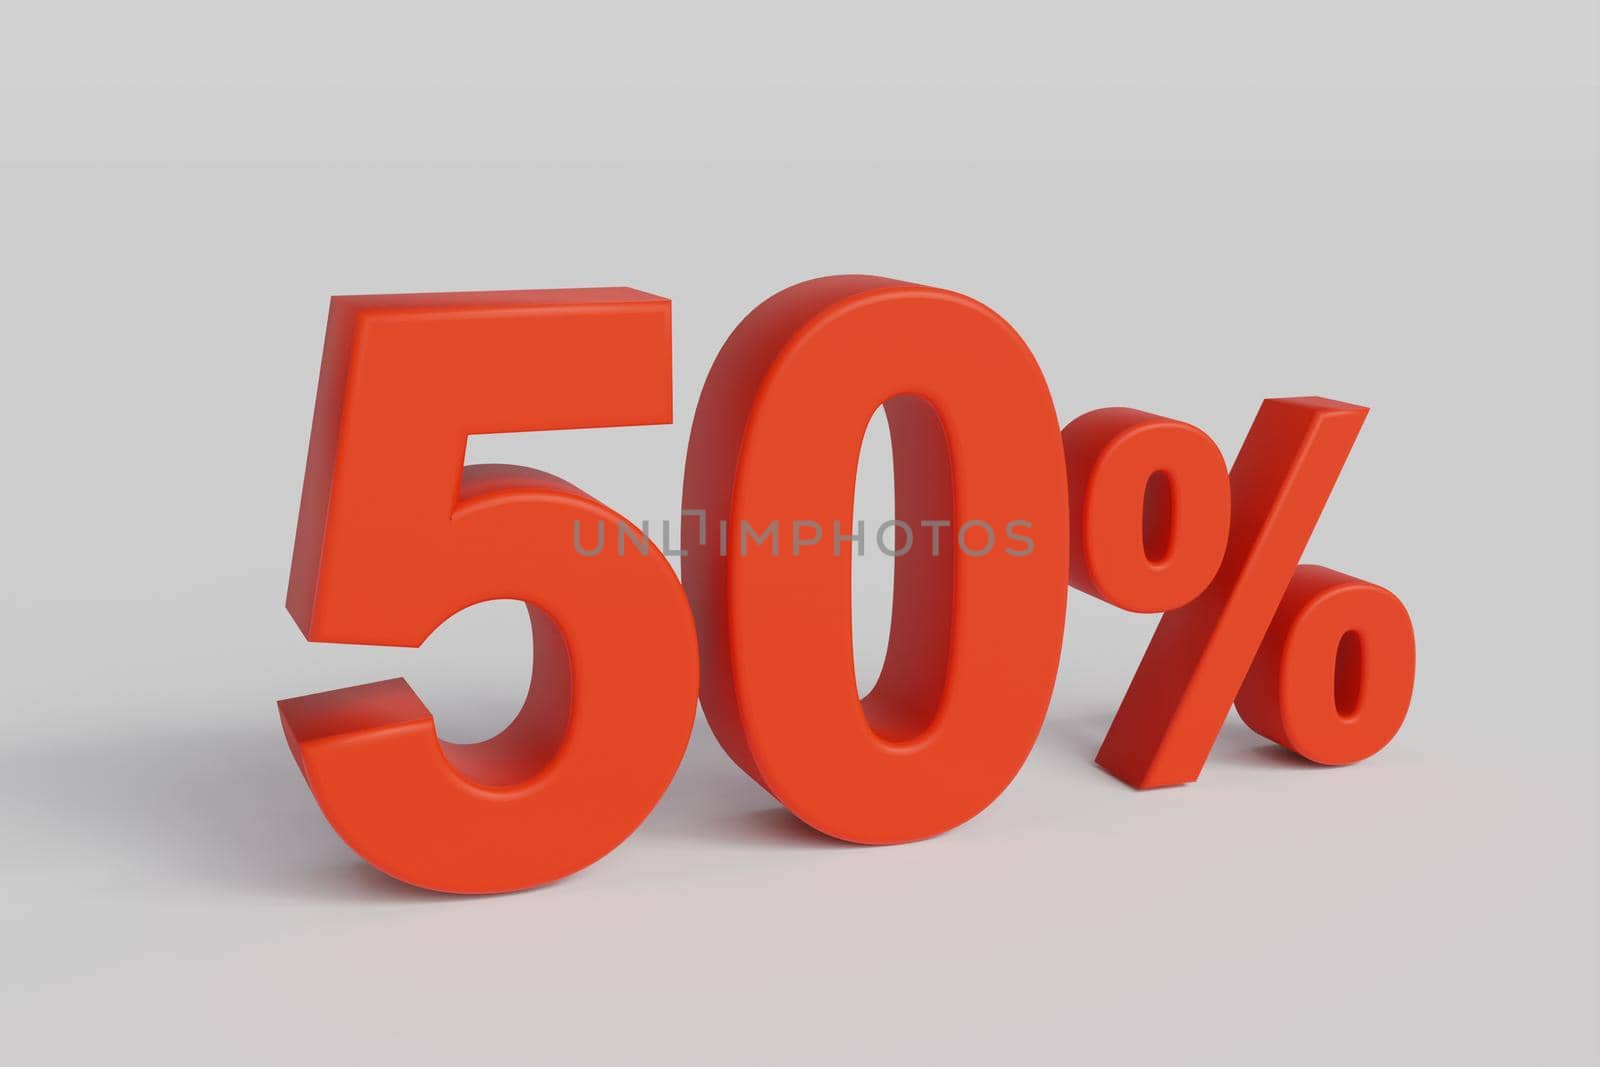 50% off on sale. Fifty percent 3D render red font isolated over white background with shadow and reflection. Clipping path included.